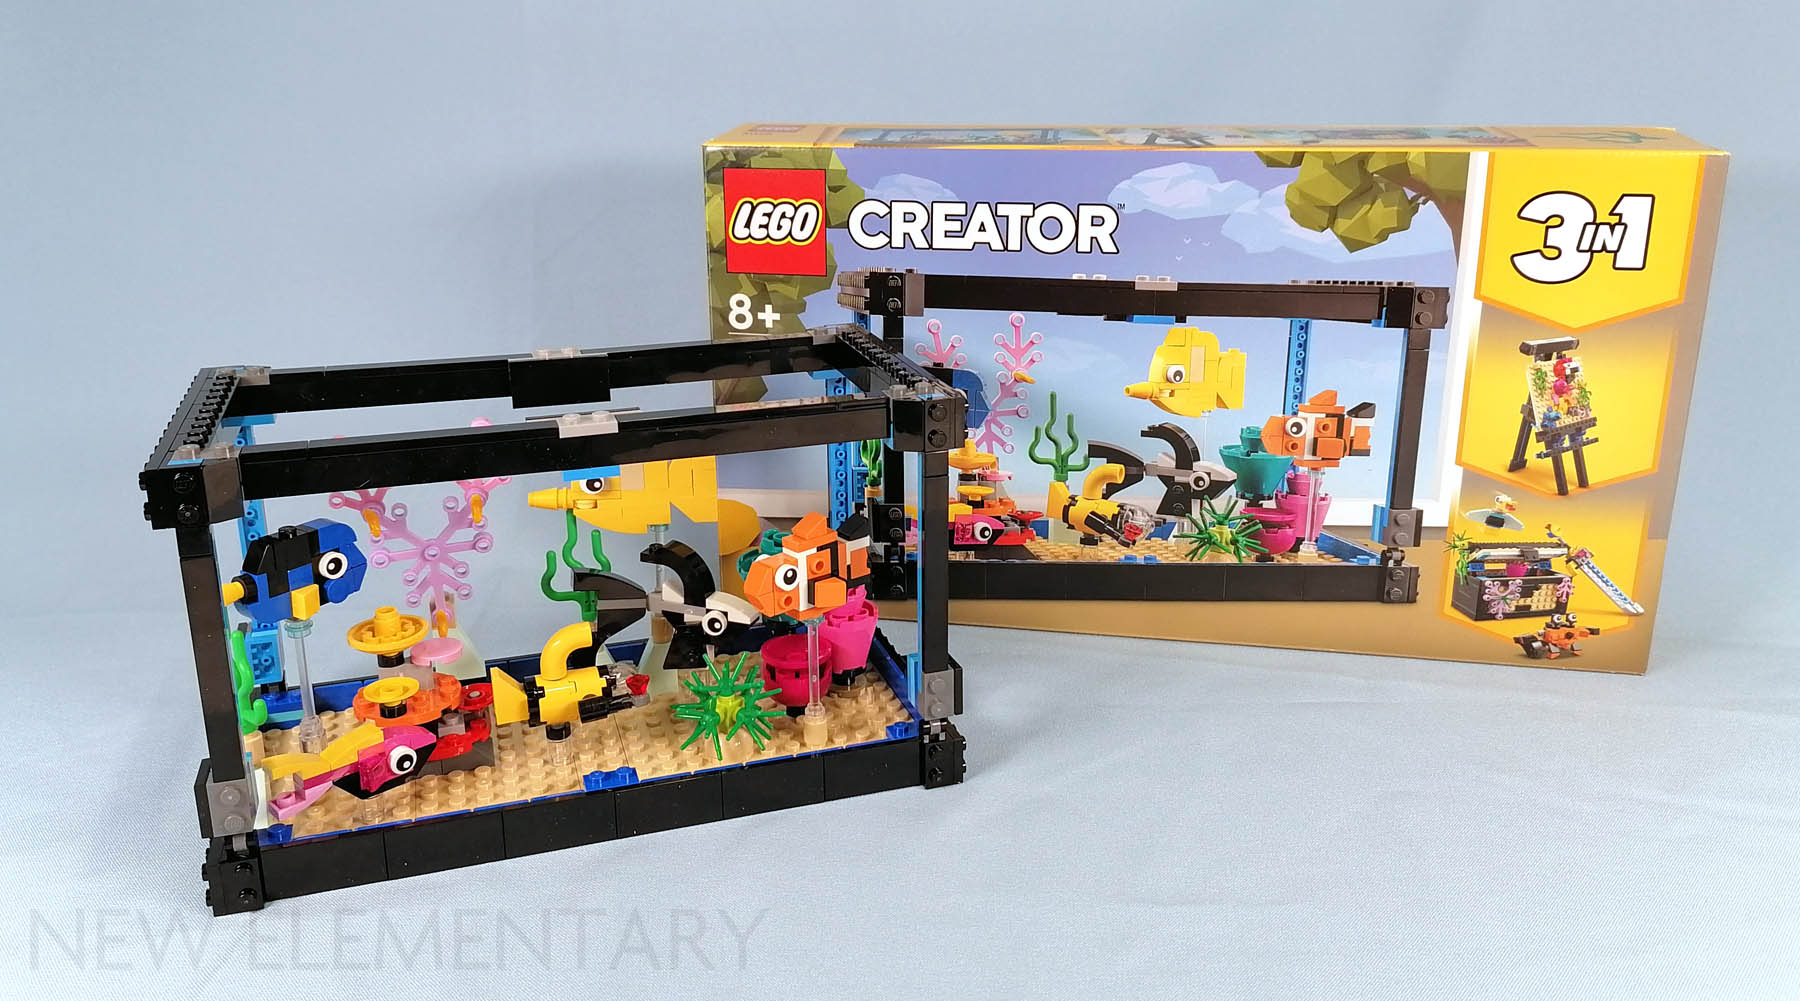 LEGO® Creator 3-in-1 review: 31122 Fish Tank | New LEGO® parts, sets and techniques